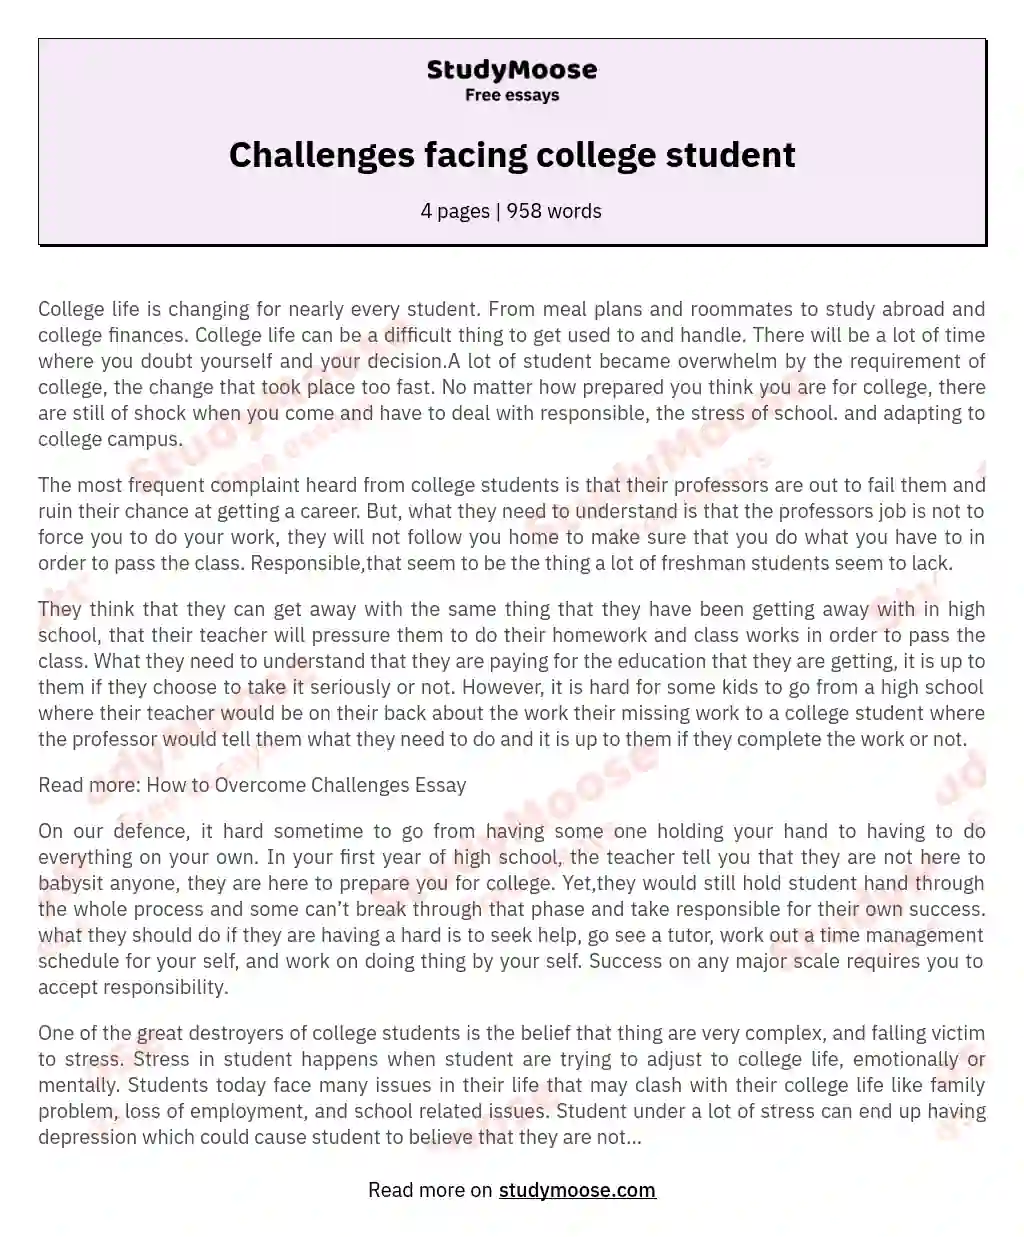 Challenges facing college student essay